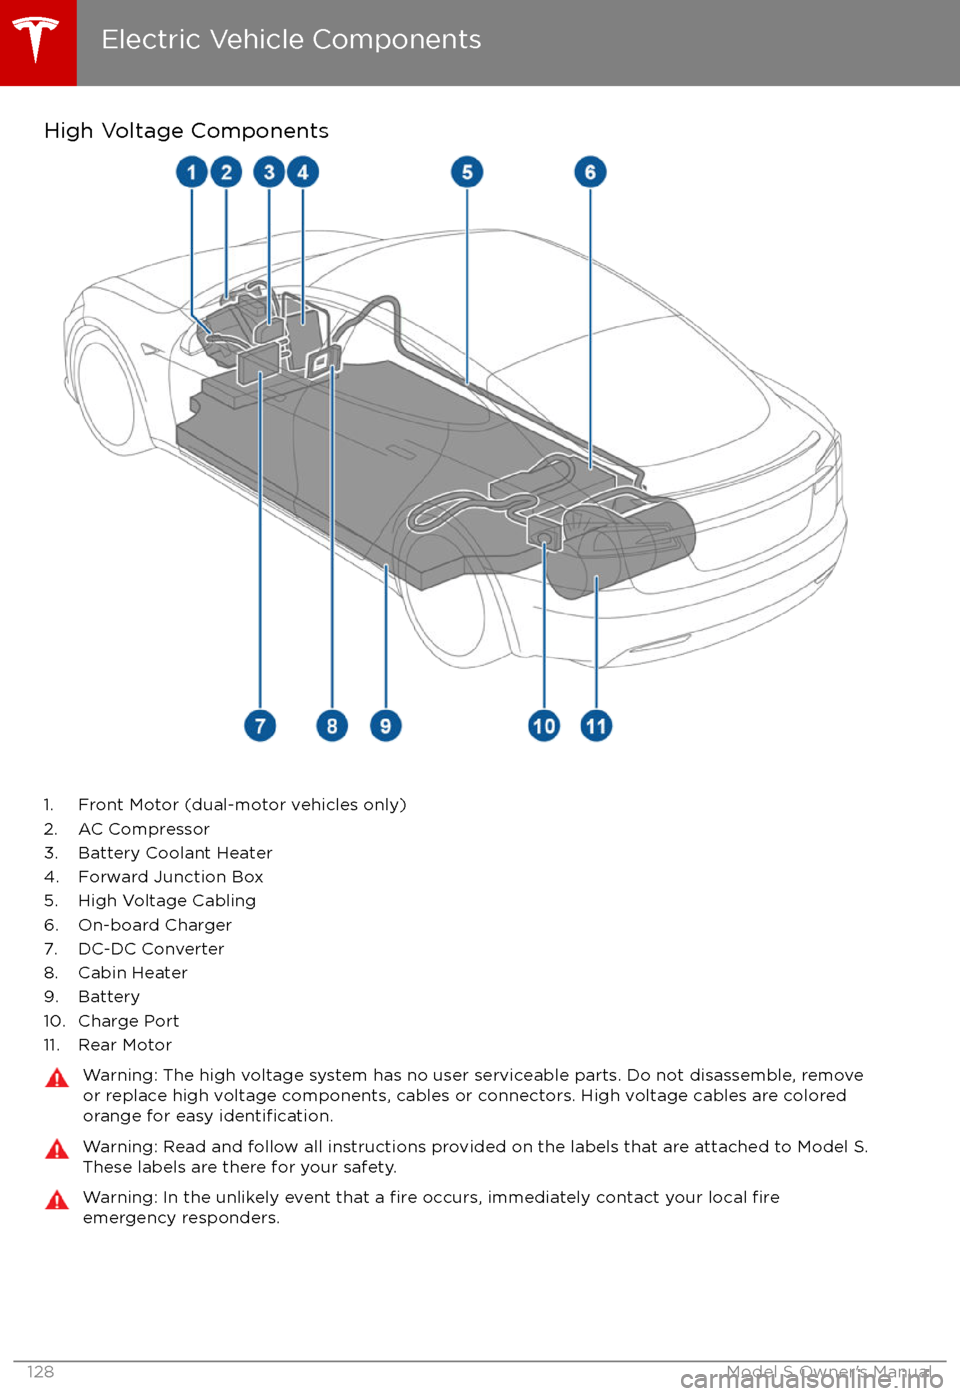 TESLA MODEL S 2017  Owners Manual High Voltage Components
1. Front Motor (dual-motor vehicles only)
2. AC Compressor
3. Battery Coolant Heater
4. Forward Junction Box
5. High Voltage Cabling
6. On-board Charger
7. DC-DC Converter
8. C